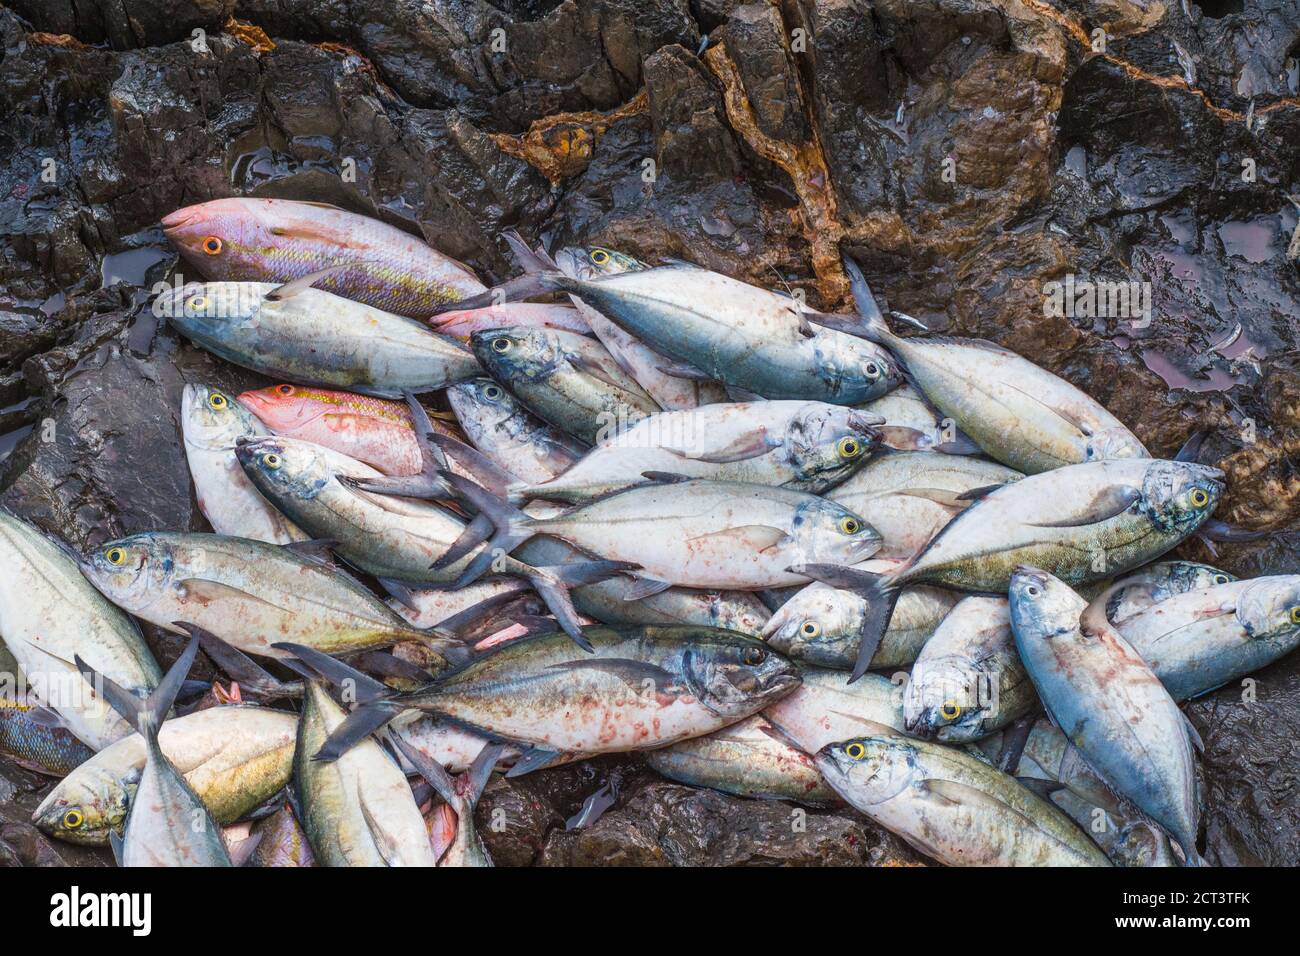 Fish catch on to rocky beach in Los Roques Venezuela, South America, ready to take to the fish market. Stock Photo